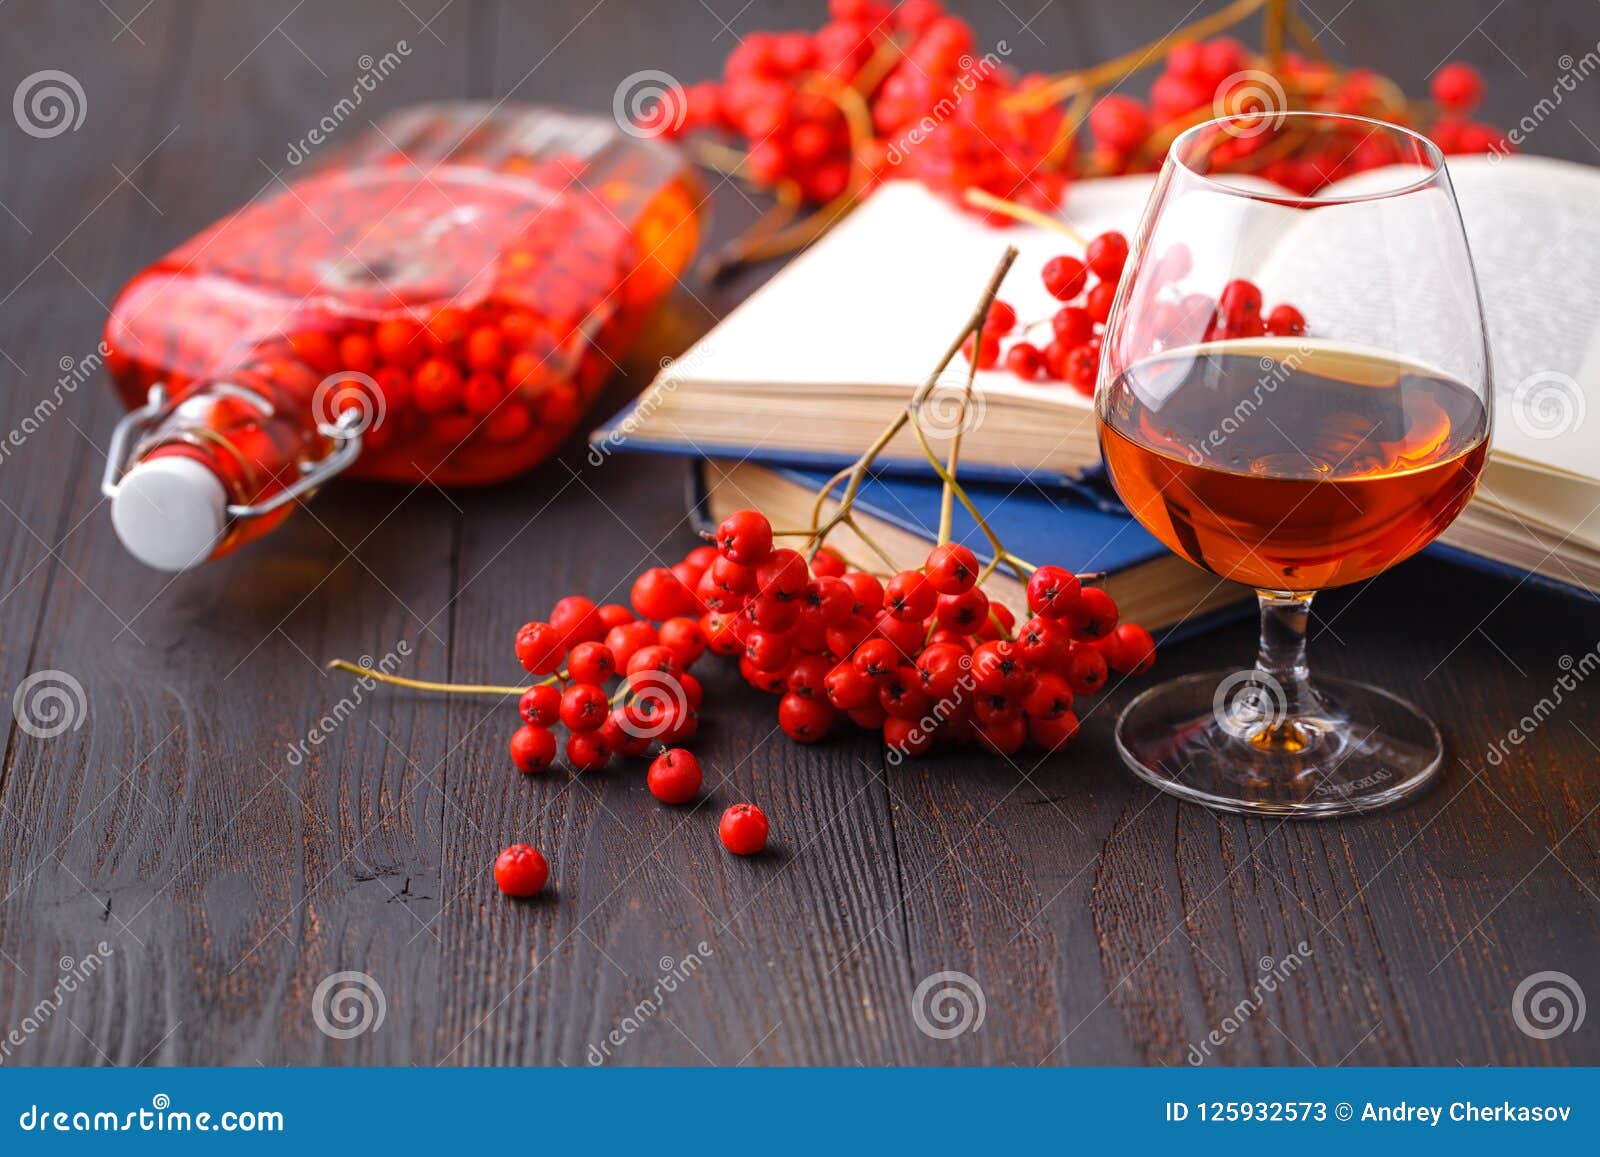 Rowanberry Natural Tincture for Winter, with Ashberry Fruits Stock ...